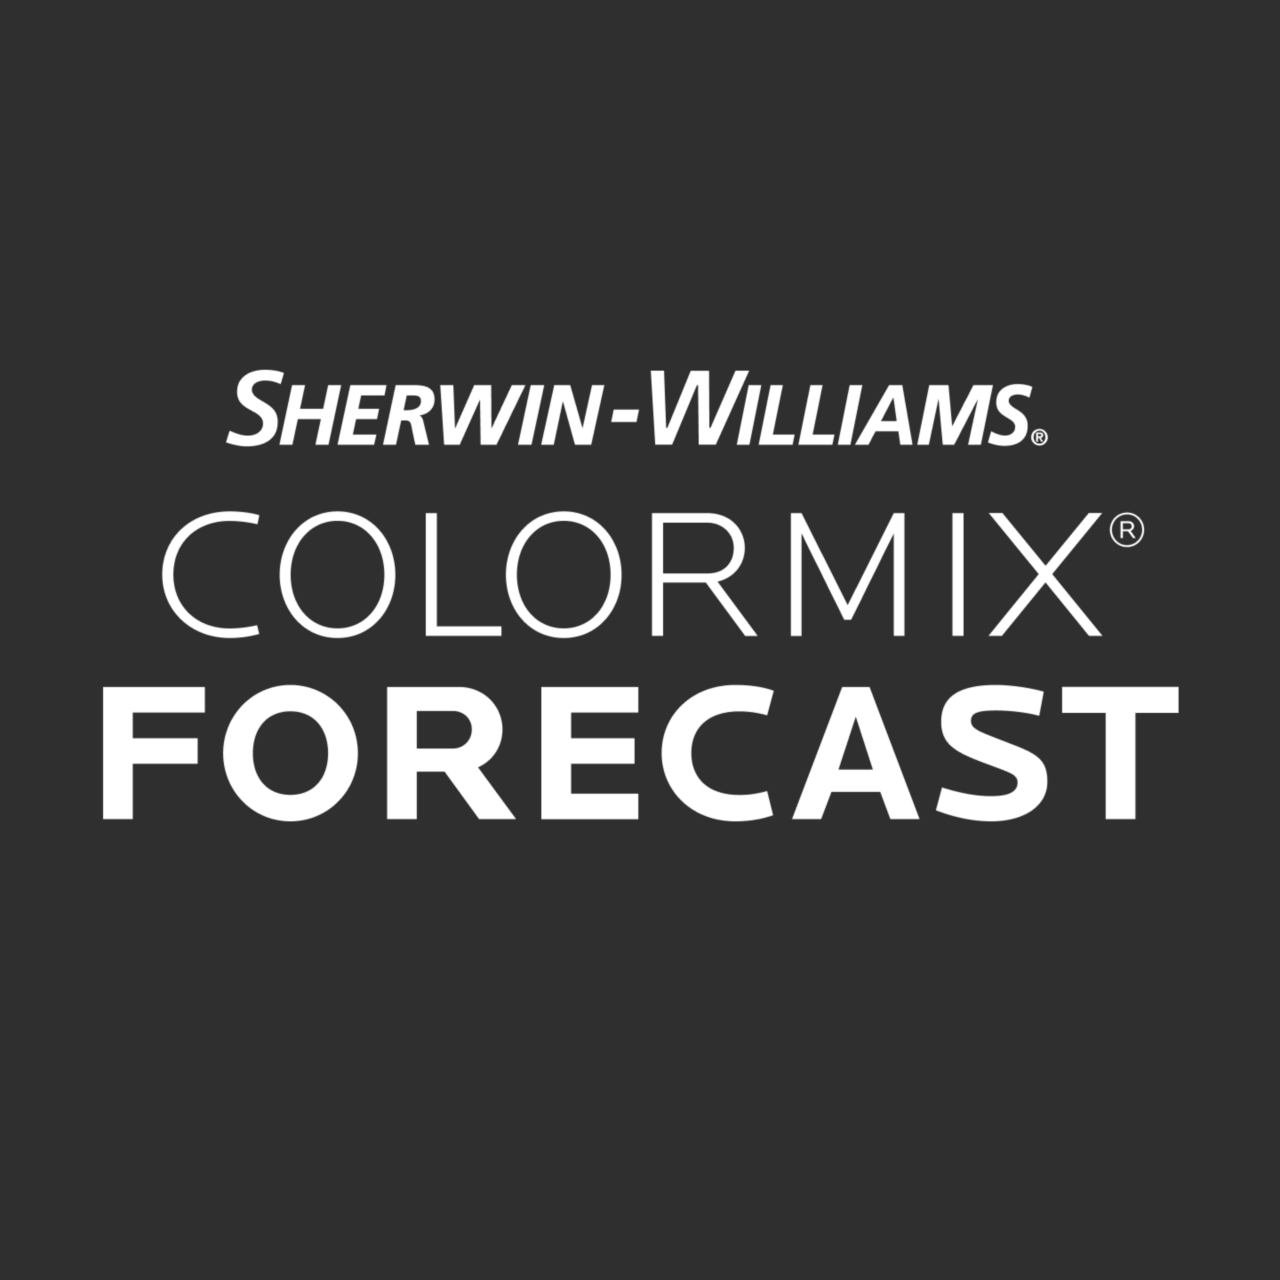 The logo for Sherwin-Williams Colormix Forecast is simple white font on an almost black background.